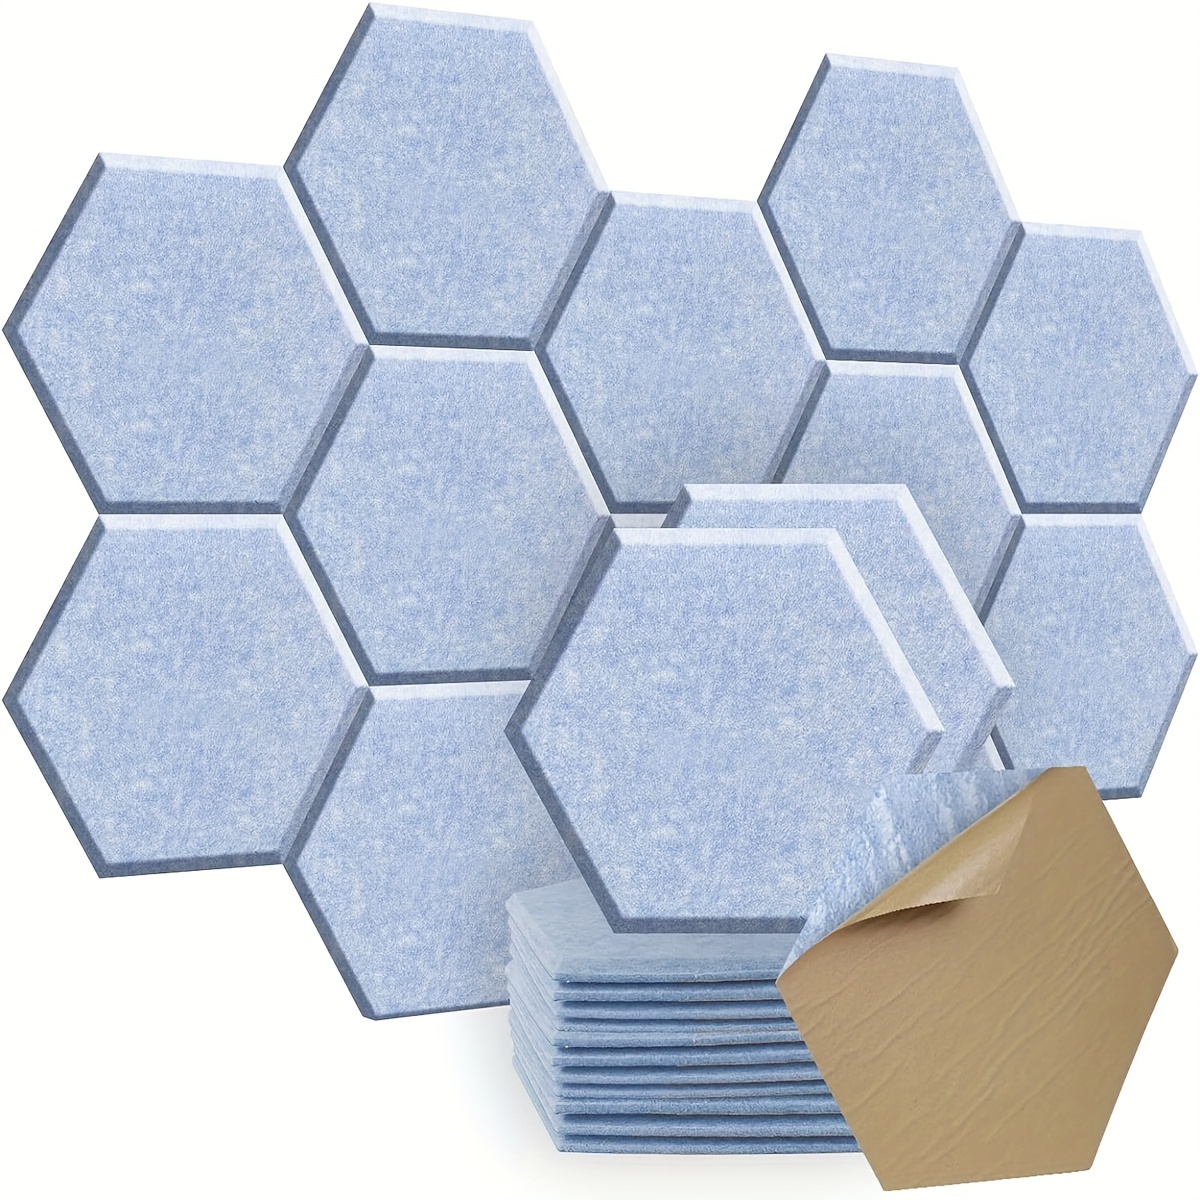 12 Pack Set Hexagon Acoustic Absorption Panel, 12 X 14 X 0.4